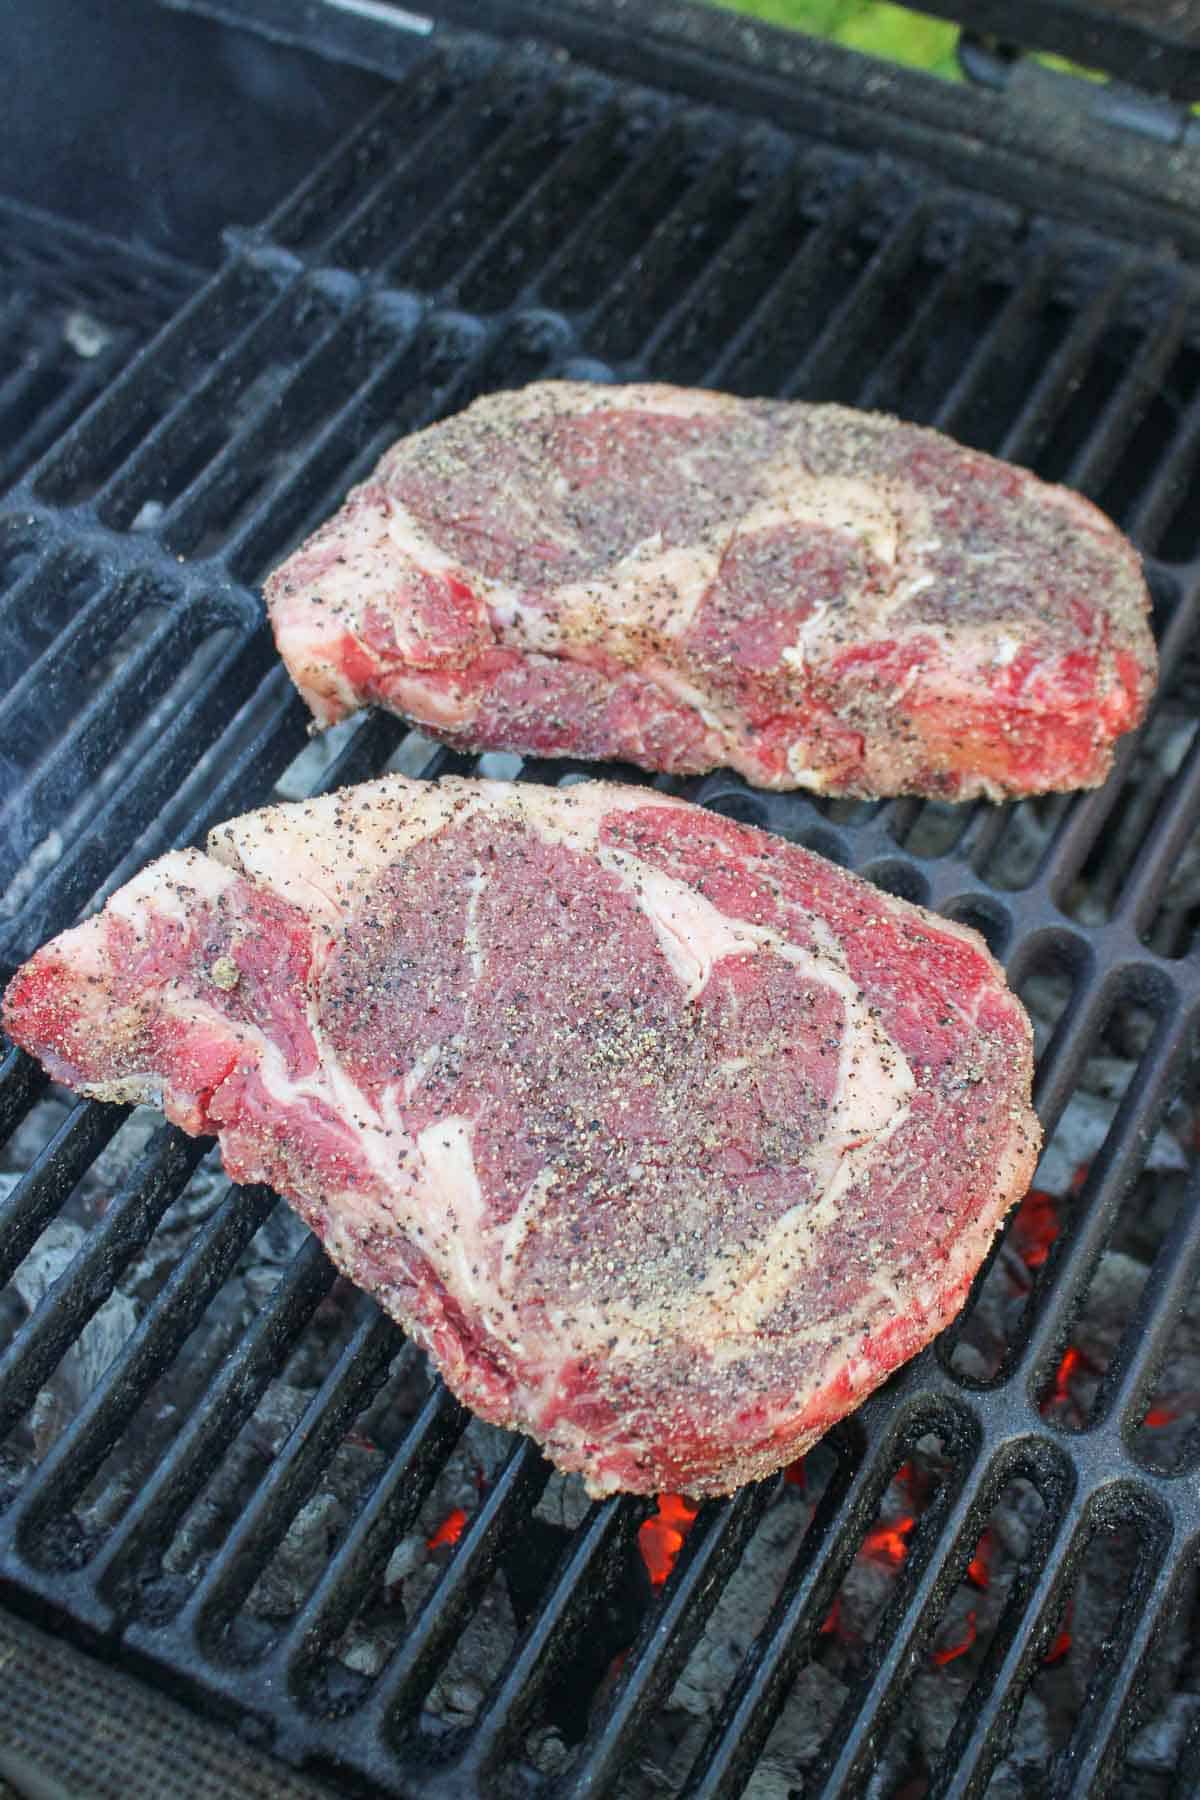 Adding the seasoned ribeyes to the grill so they can start cooking.